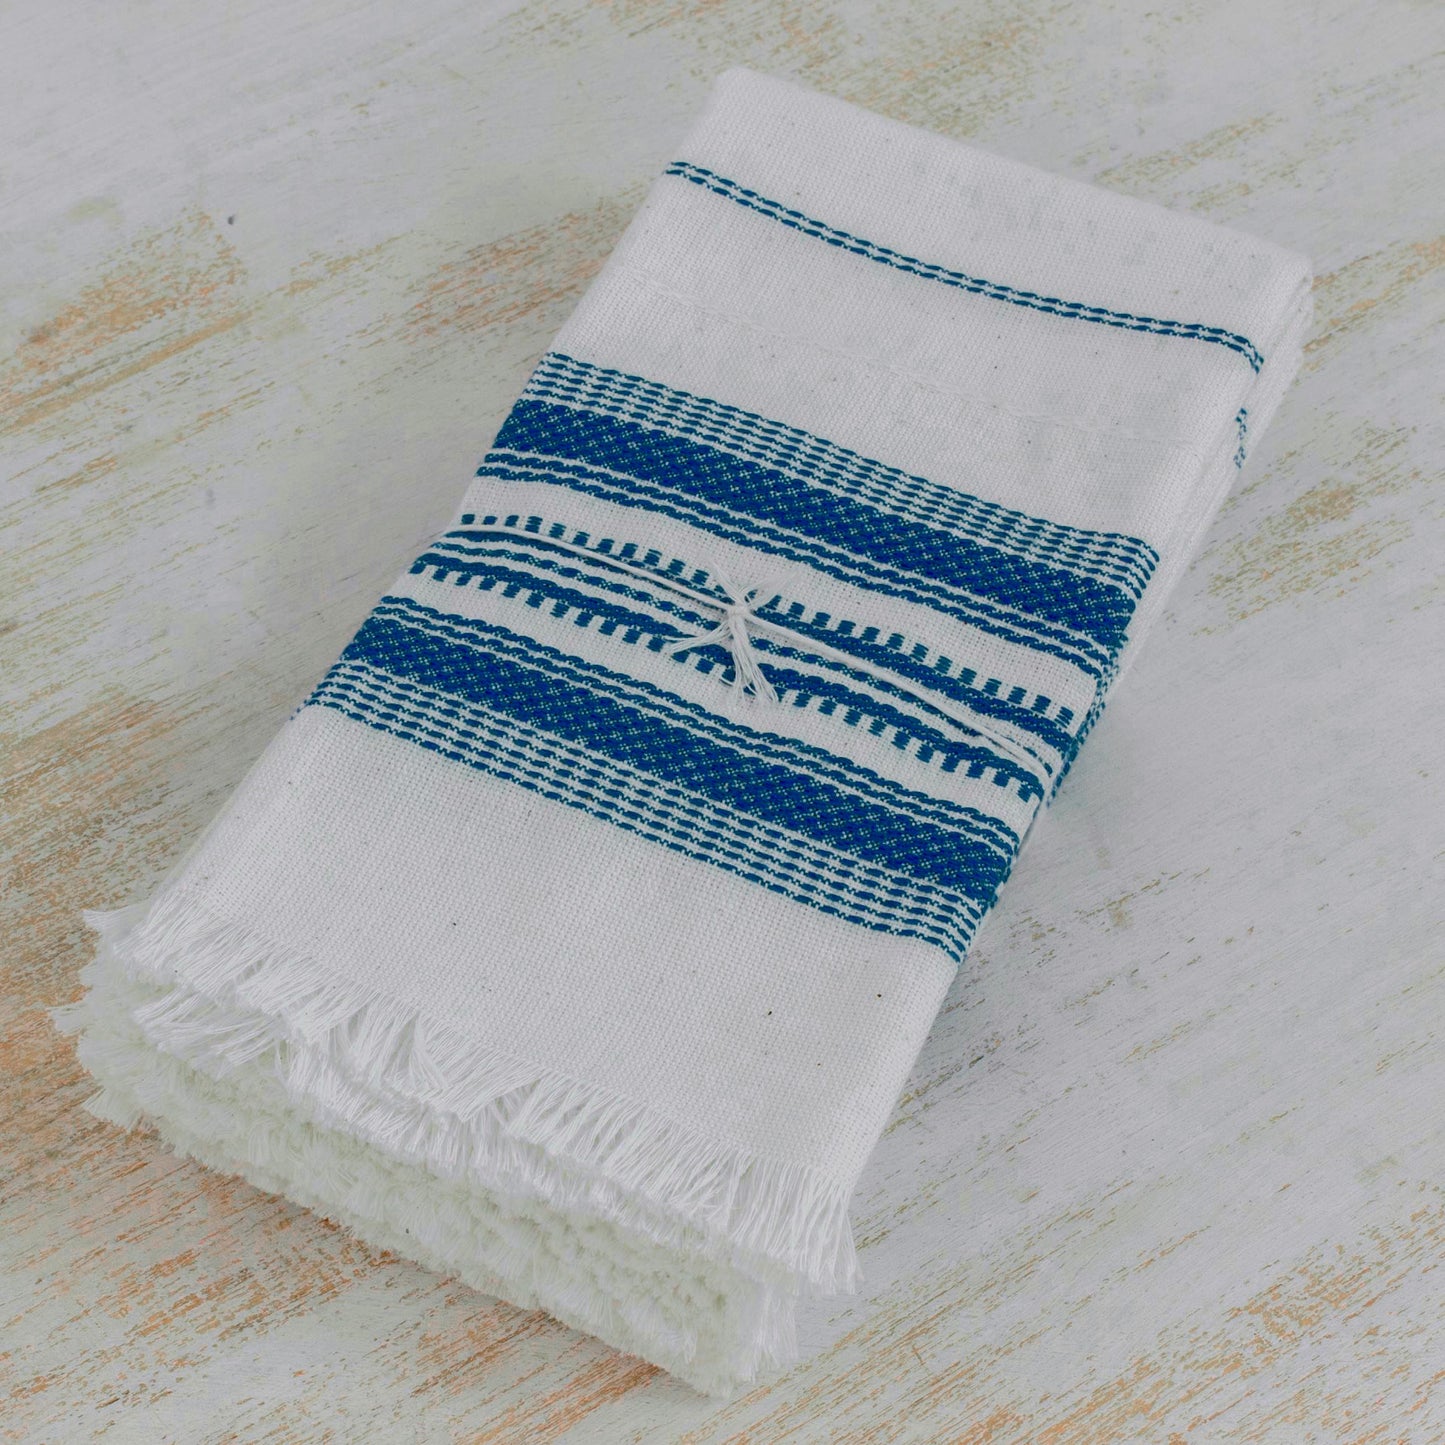 Cheerful Kitchen in Blue Striped 100% Cotton Napkins from Guatemala (Set of 6)